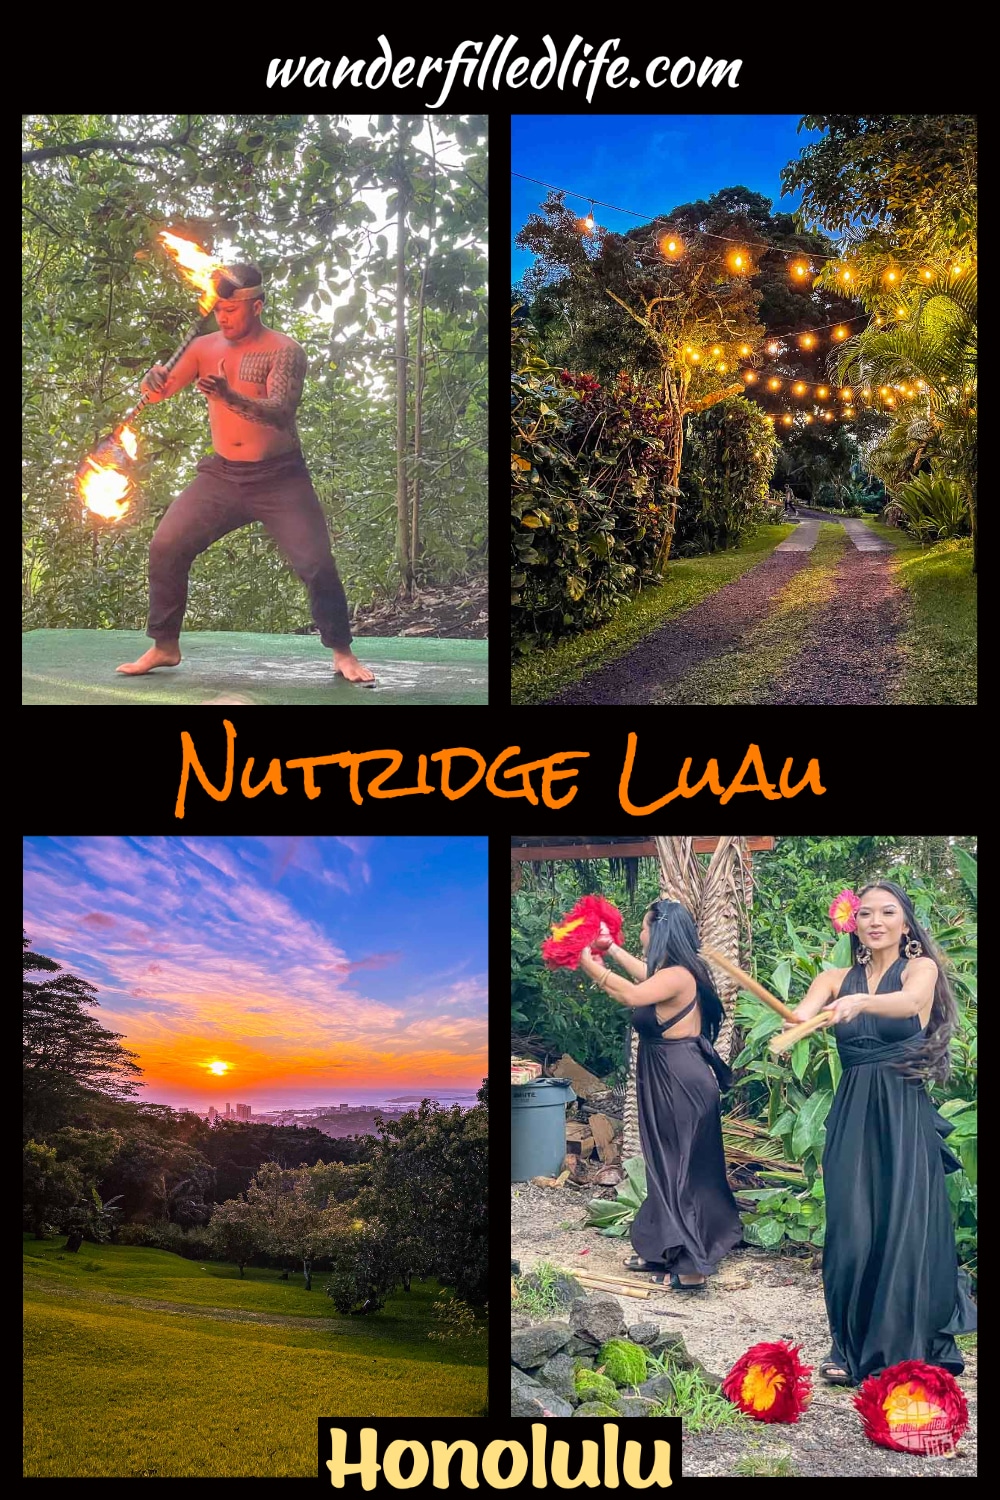 If you're looking for a luau on Oahu, you can't go wrong with the Experience Nutridge luau. This small luau is more family party than show.